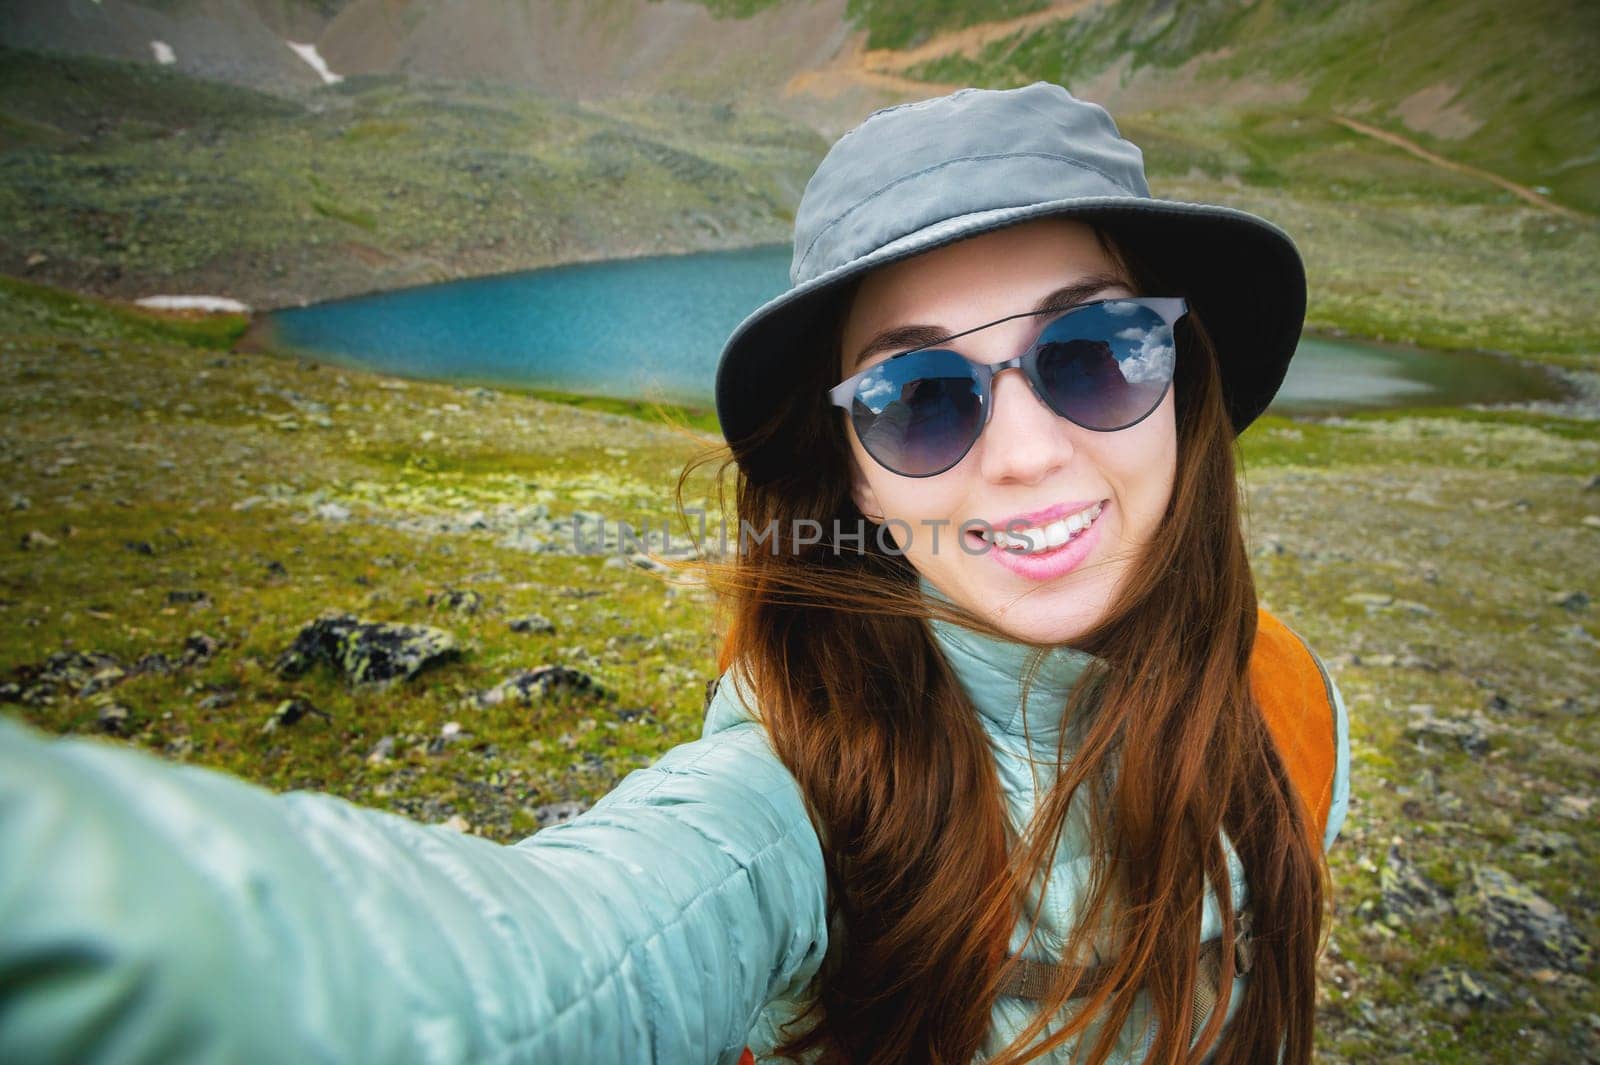 Portrait of a young happy smiling woman with long brunette hair, wearing a jacket and sunglasses, taking a selfie over the top of a mountain lake. Adventure, travel, vacation concept.